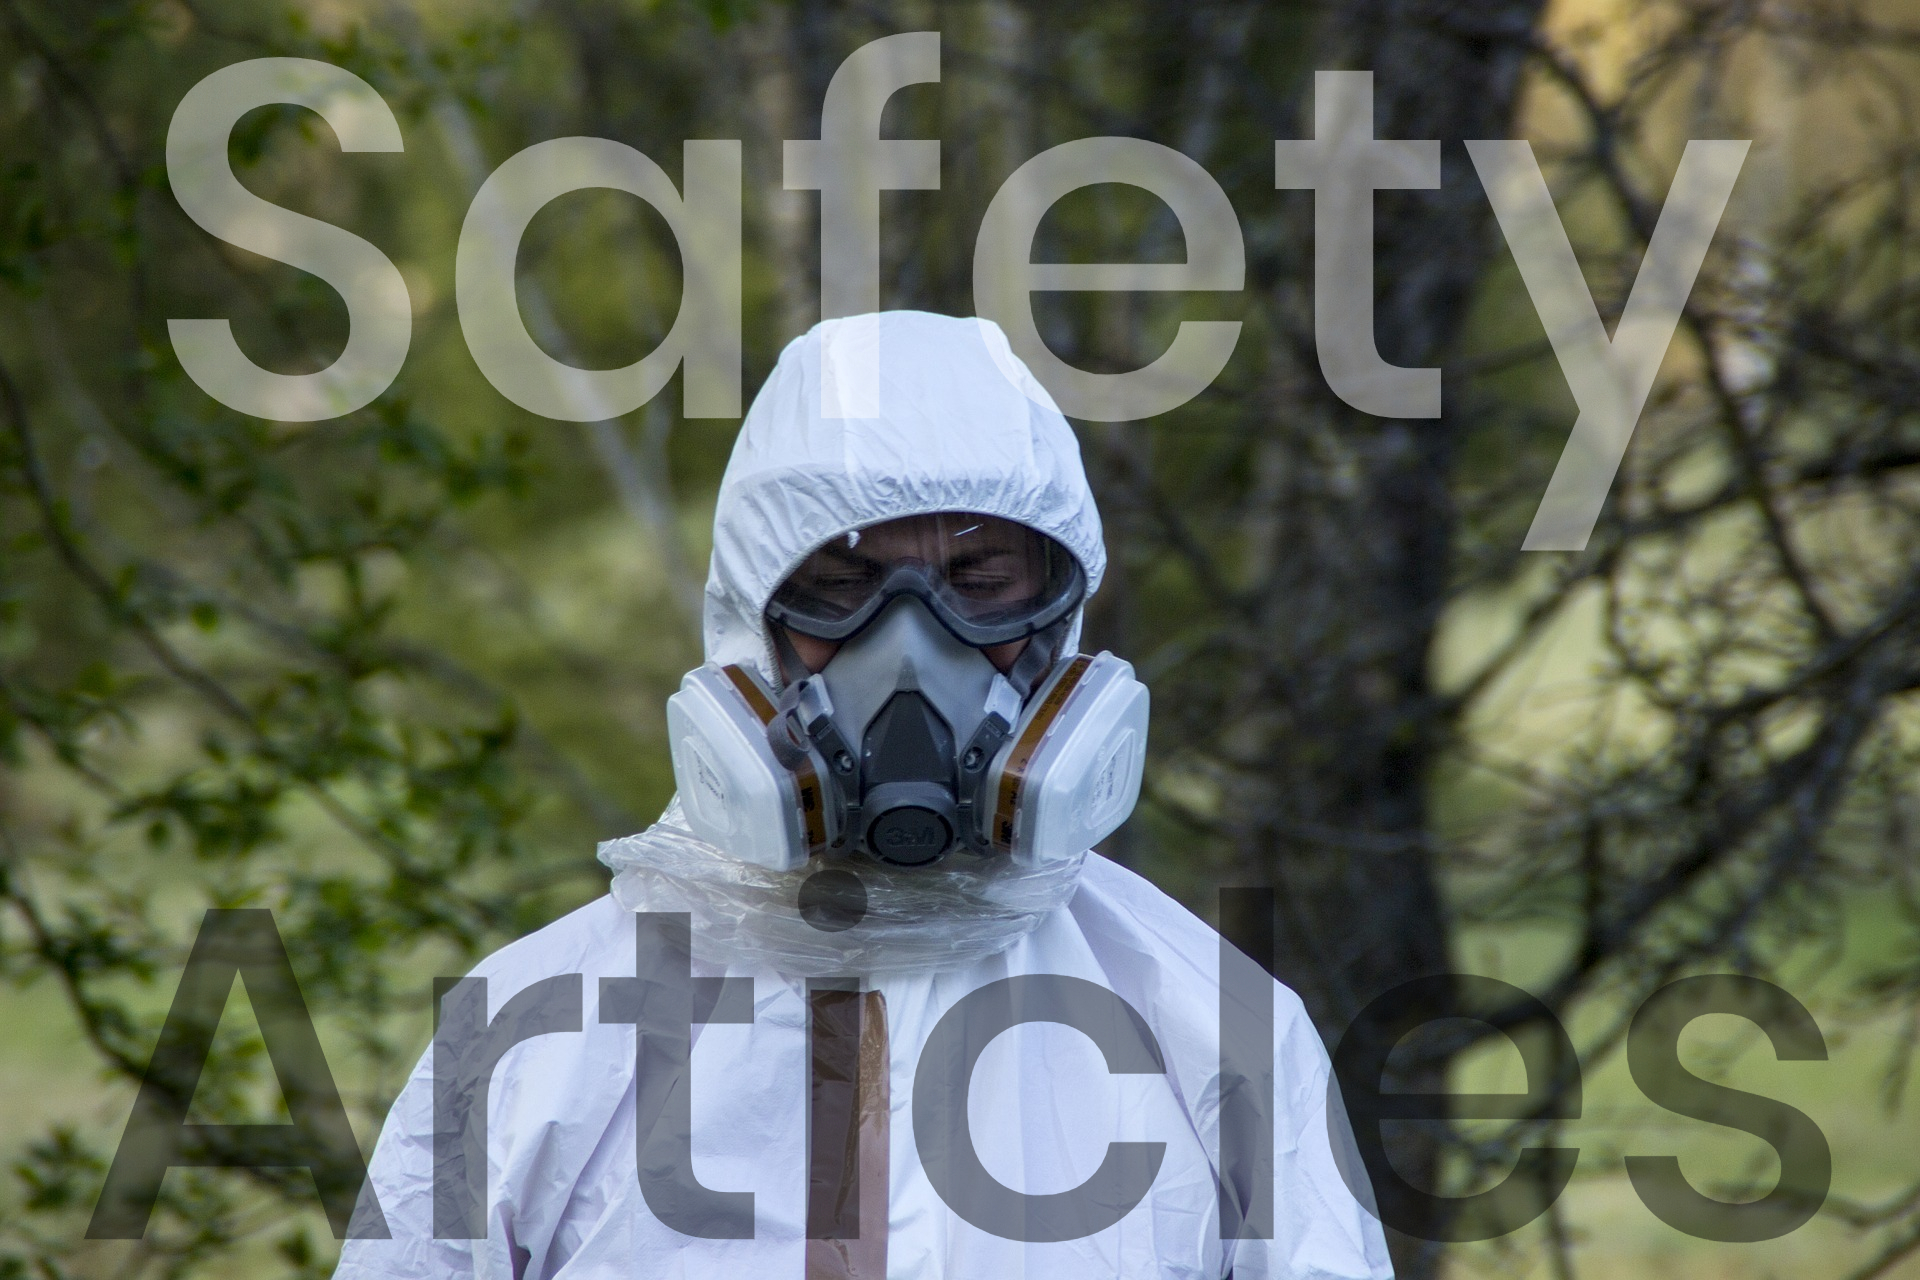 Safety Articles